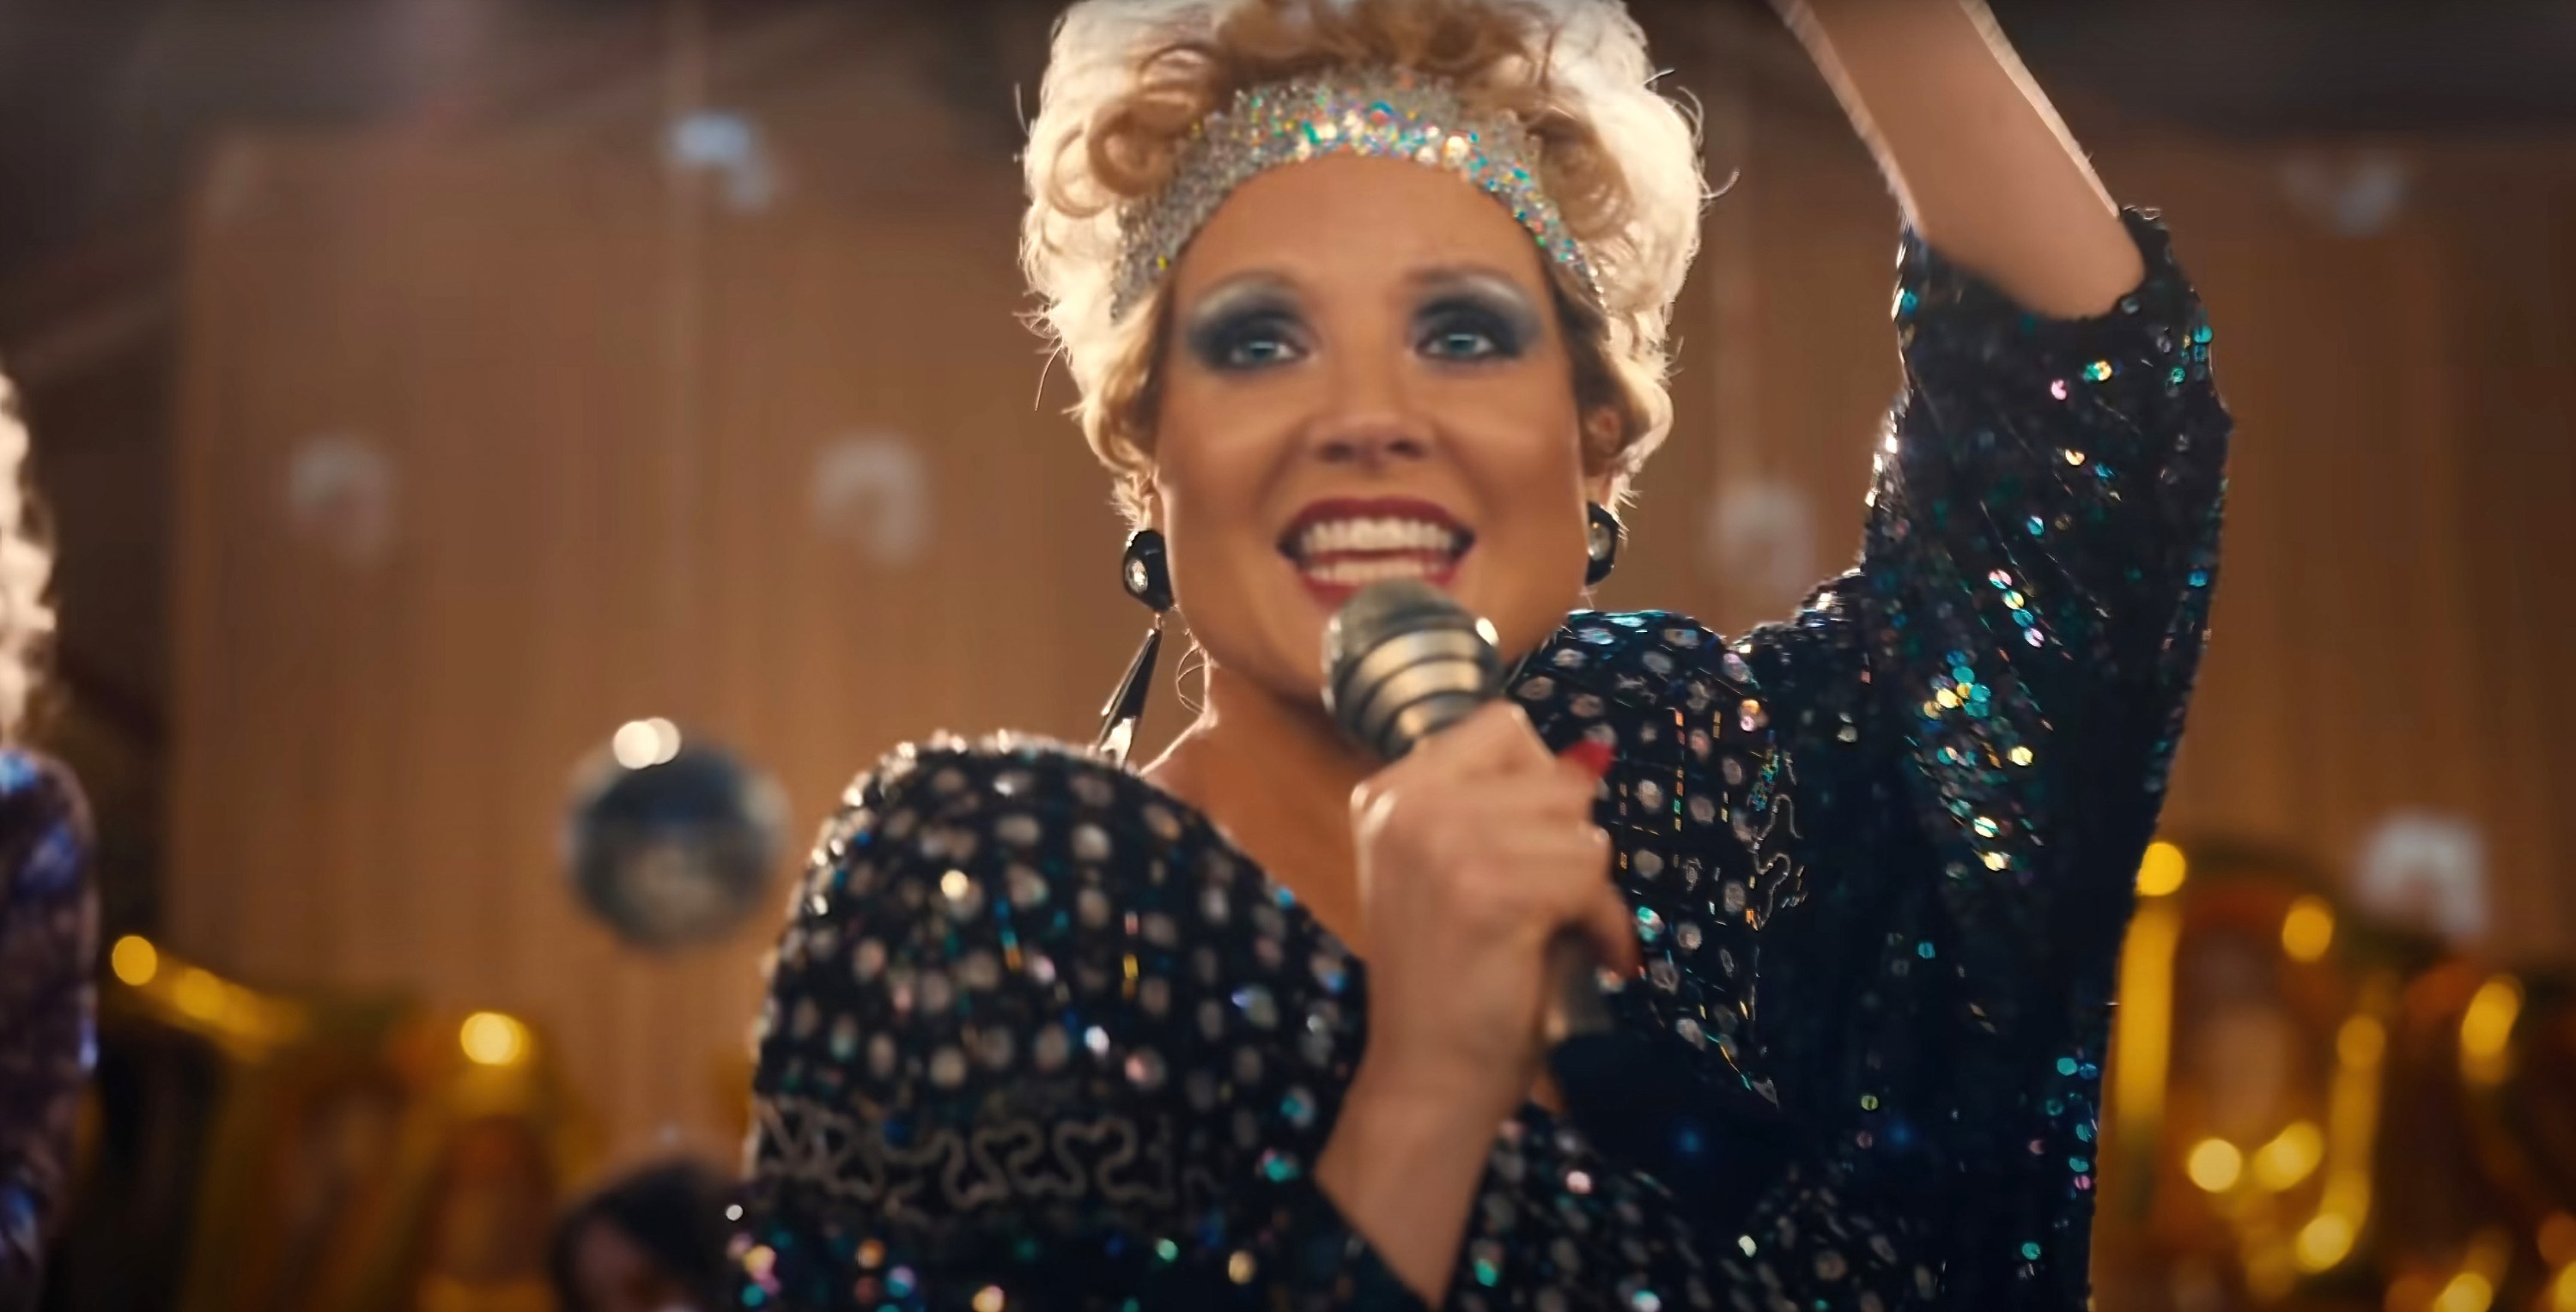 Jessica sings into a microphone while playing Tammy who is wearing a sequin headband around short curly hair